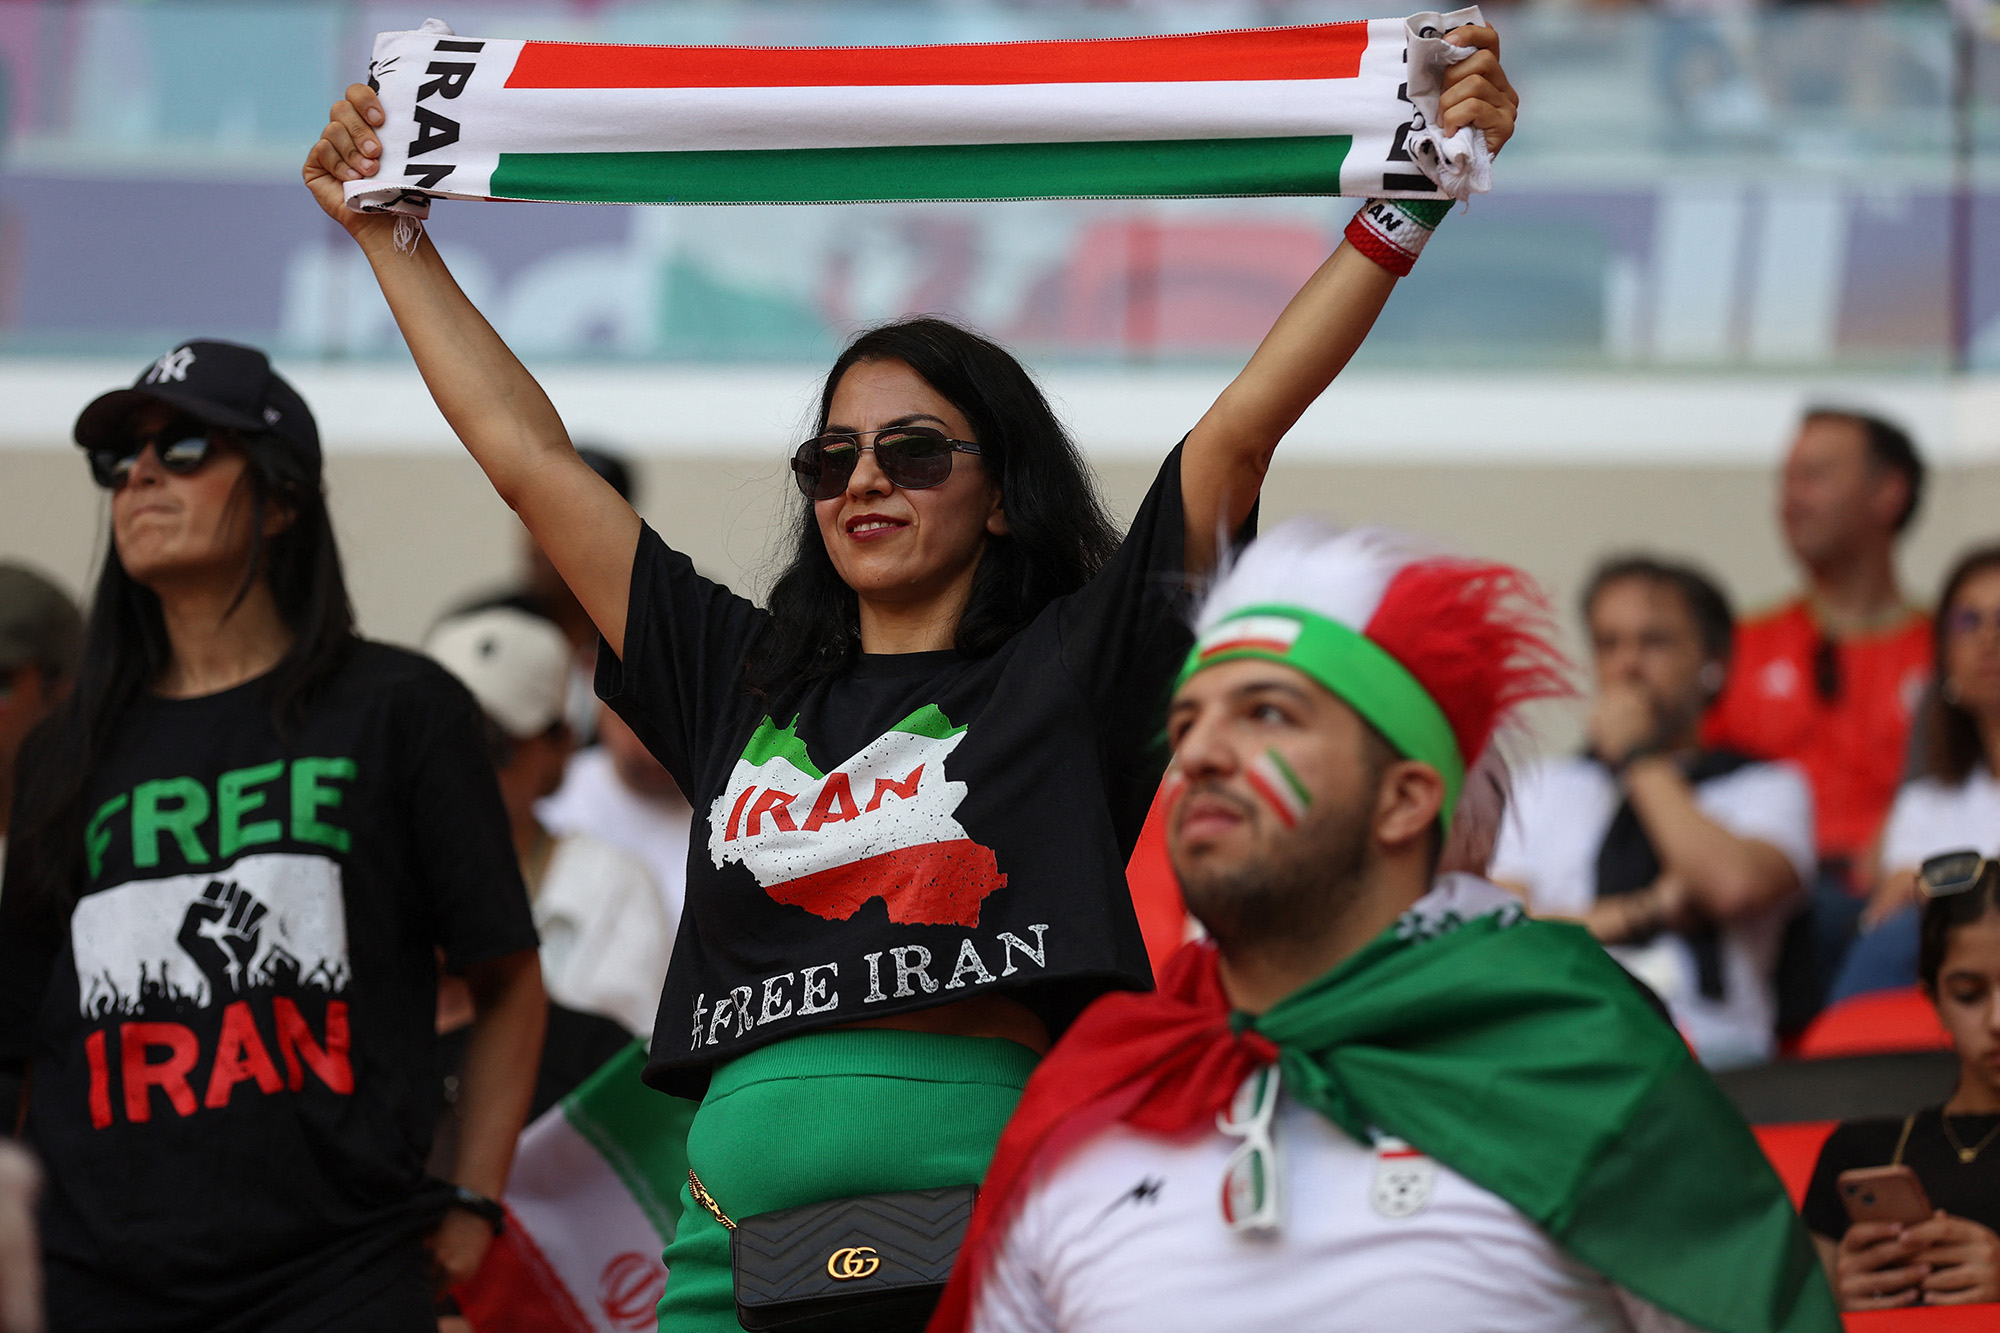 Supporters of Iran attend the Qatar 2022 World Cup Group B football match between Wales and Iran at the Ahmad Bin Ali Stadium in Al-Rayyan, on November 25.